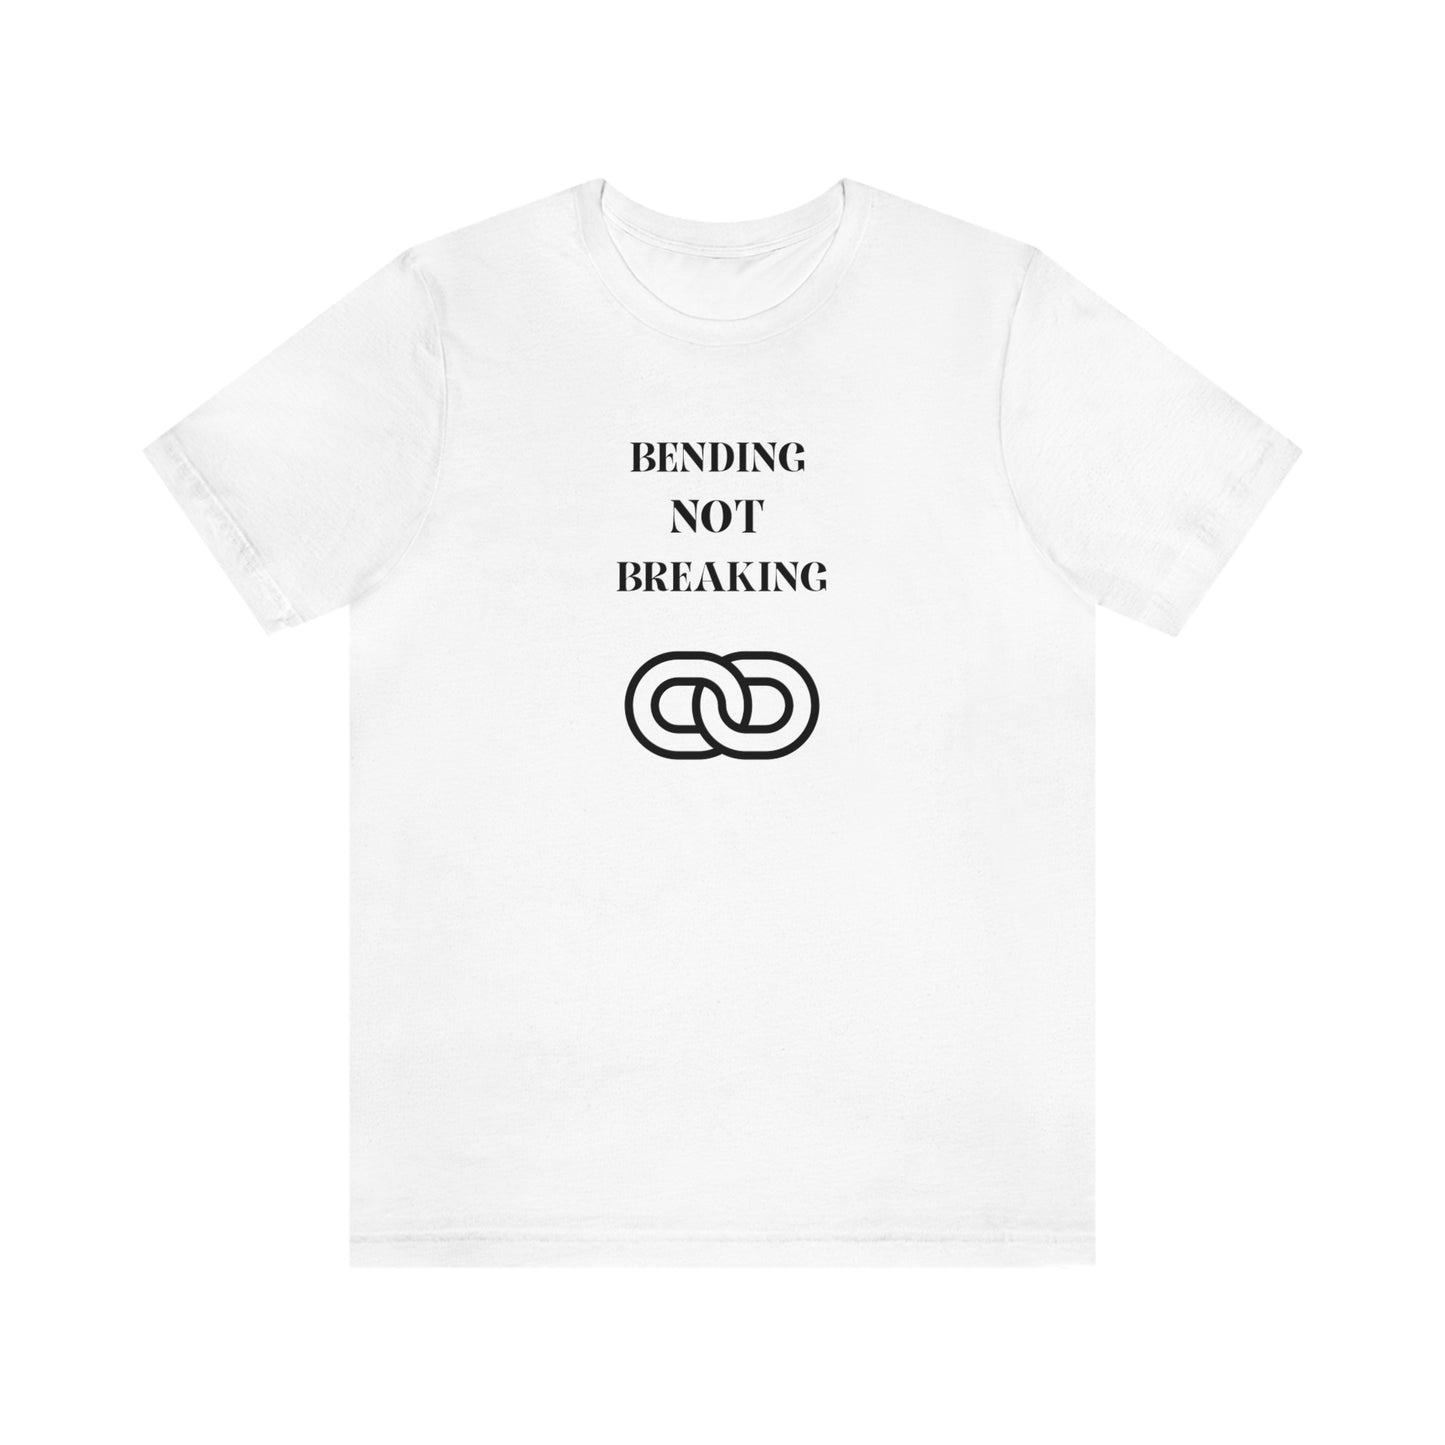 Bending not breaking inspirational words on a t shirt, t shirt that motivates t shirt gifts for friends and family